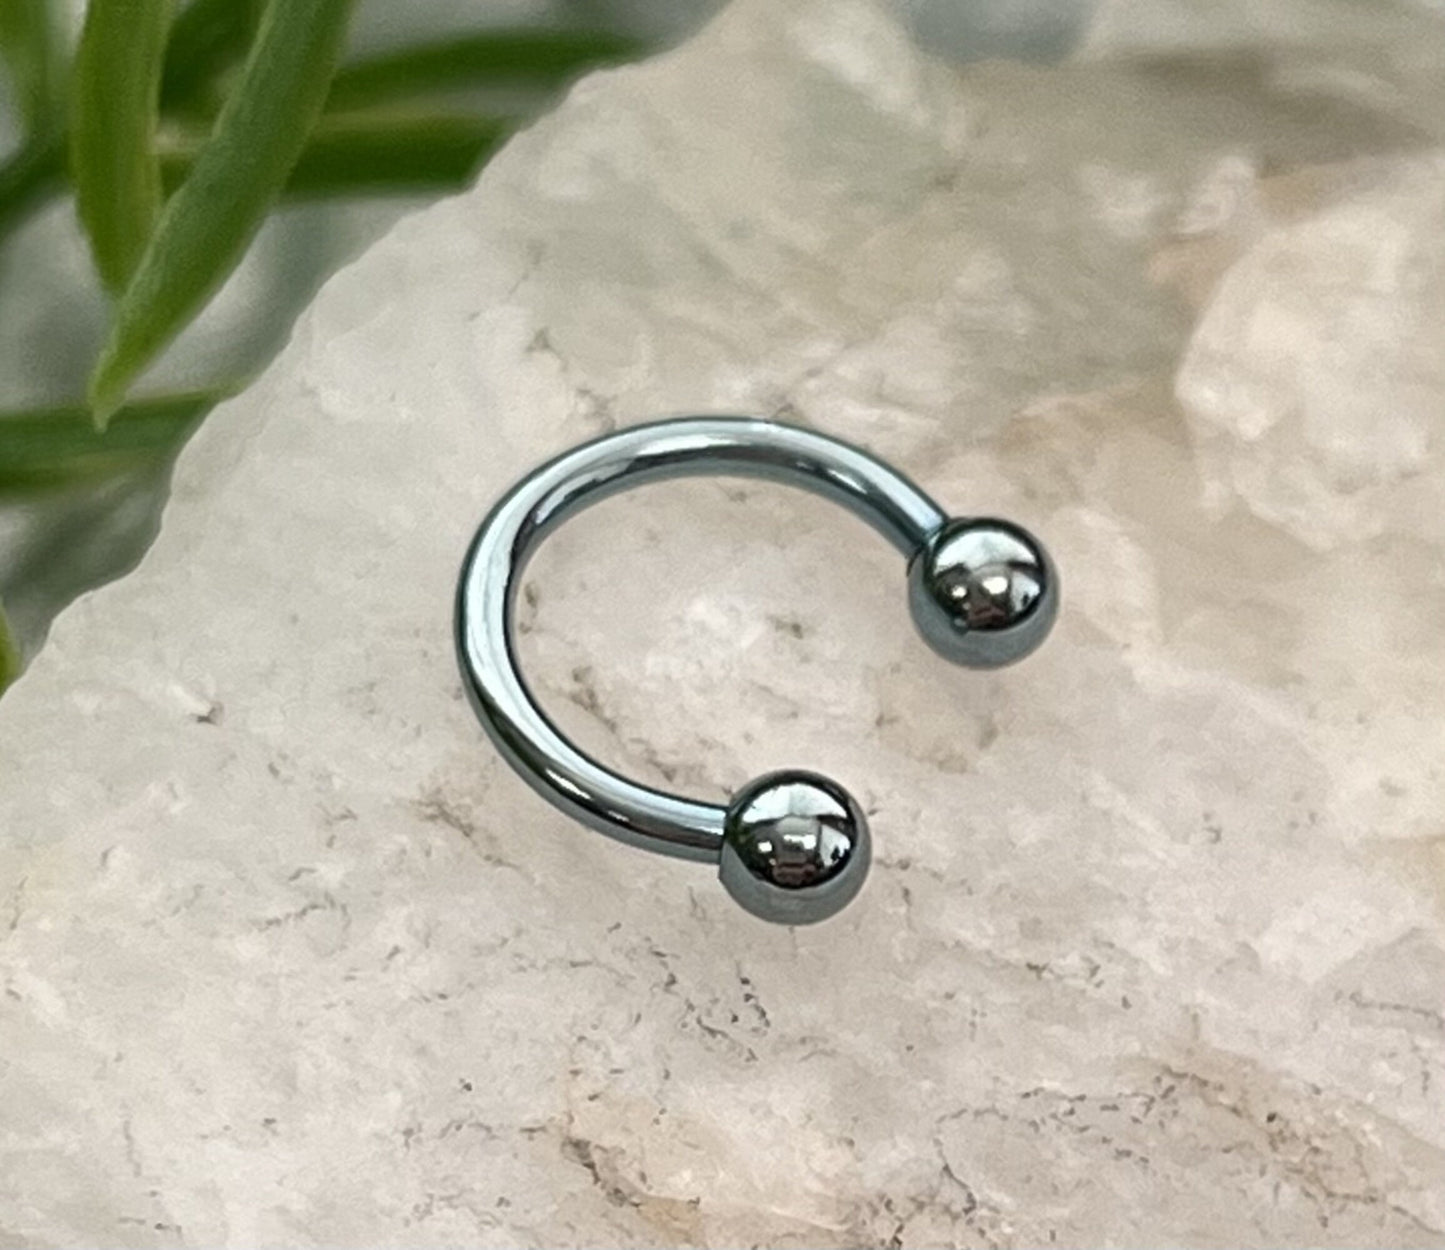 PAIR of Beautiful Light Blue Titanium Anodized Circular Barbell Horseshoe Ring - 18g thru 14g with Assorted Ball Sizes!!